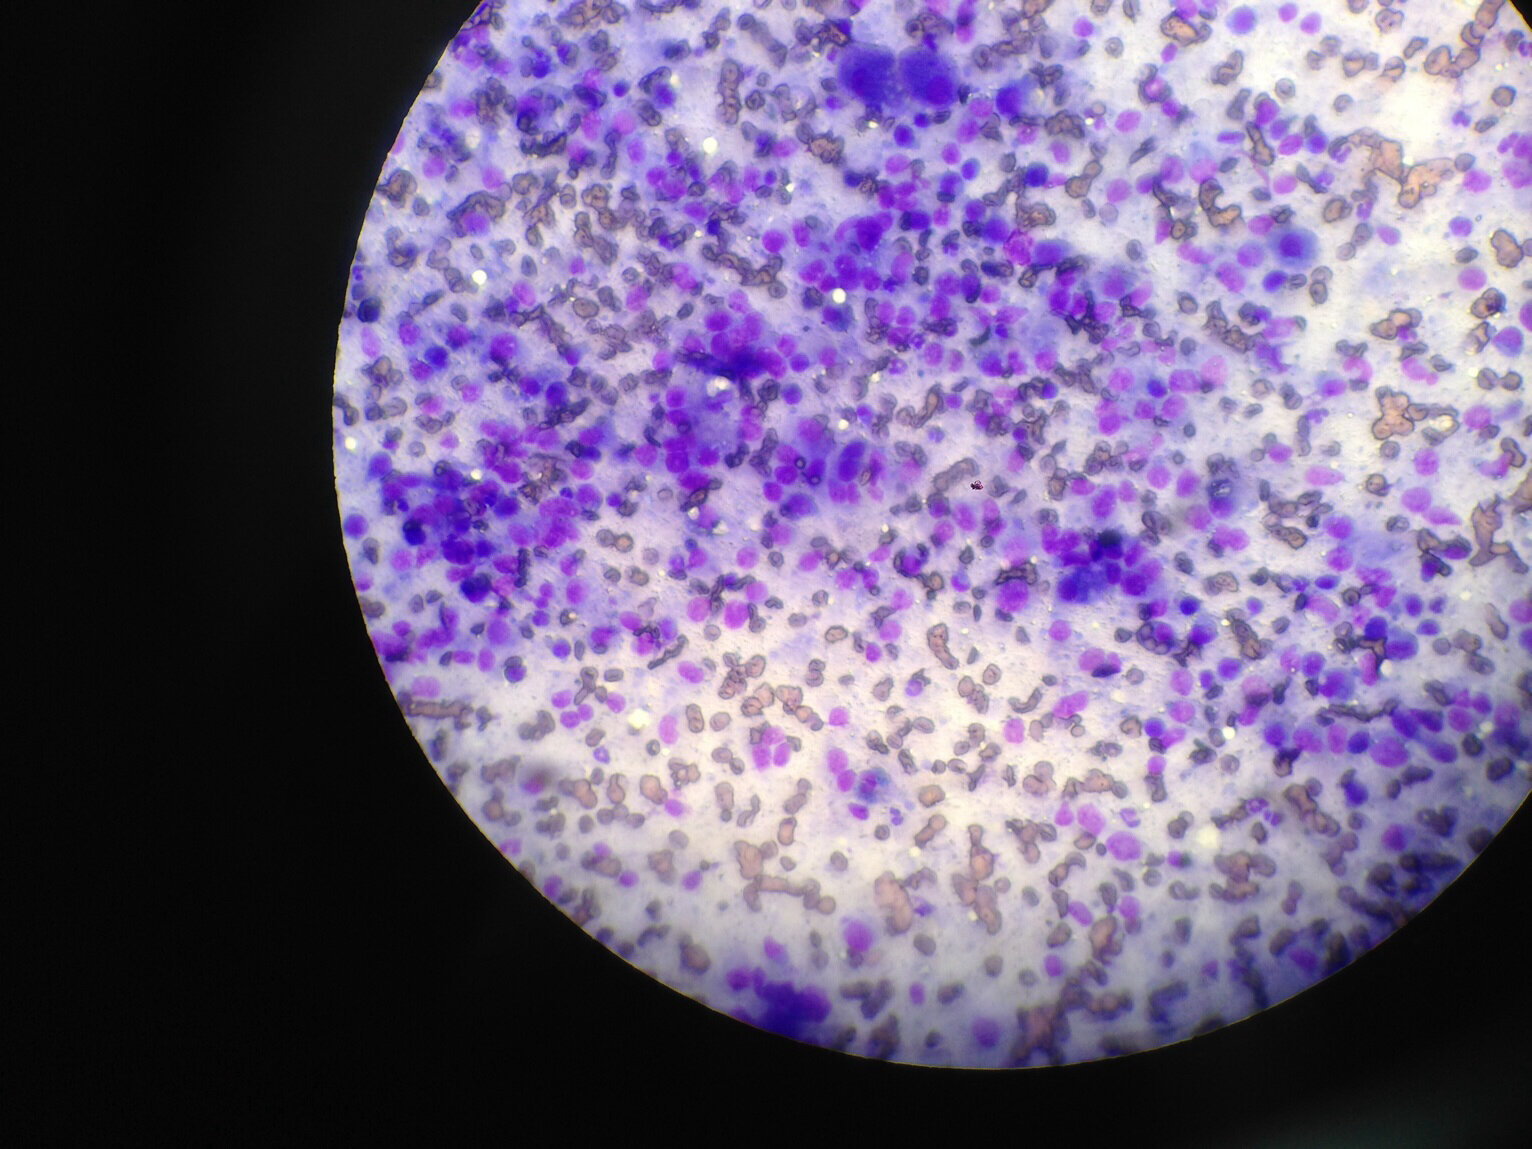 What is your diagnosis? Cytology of the liver.